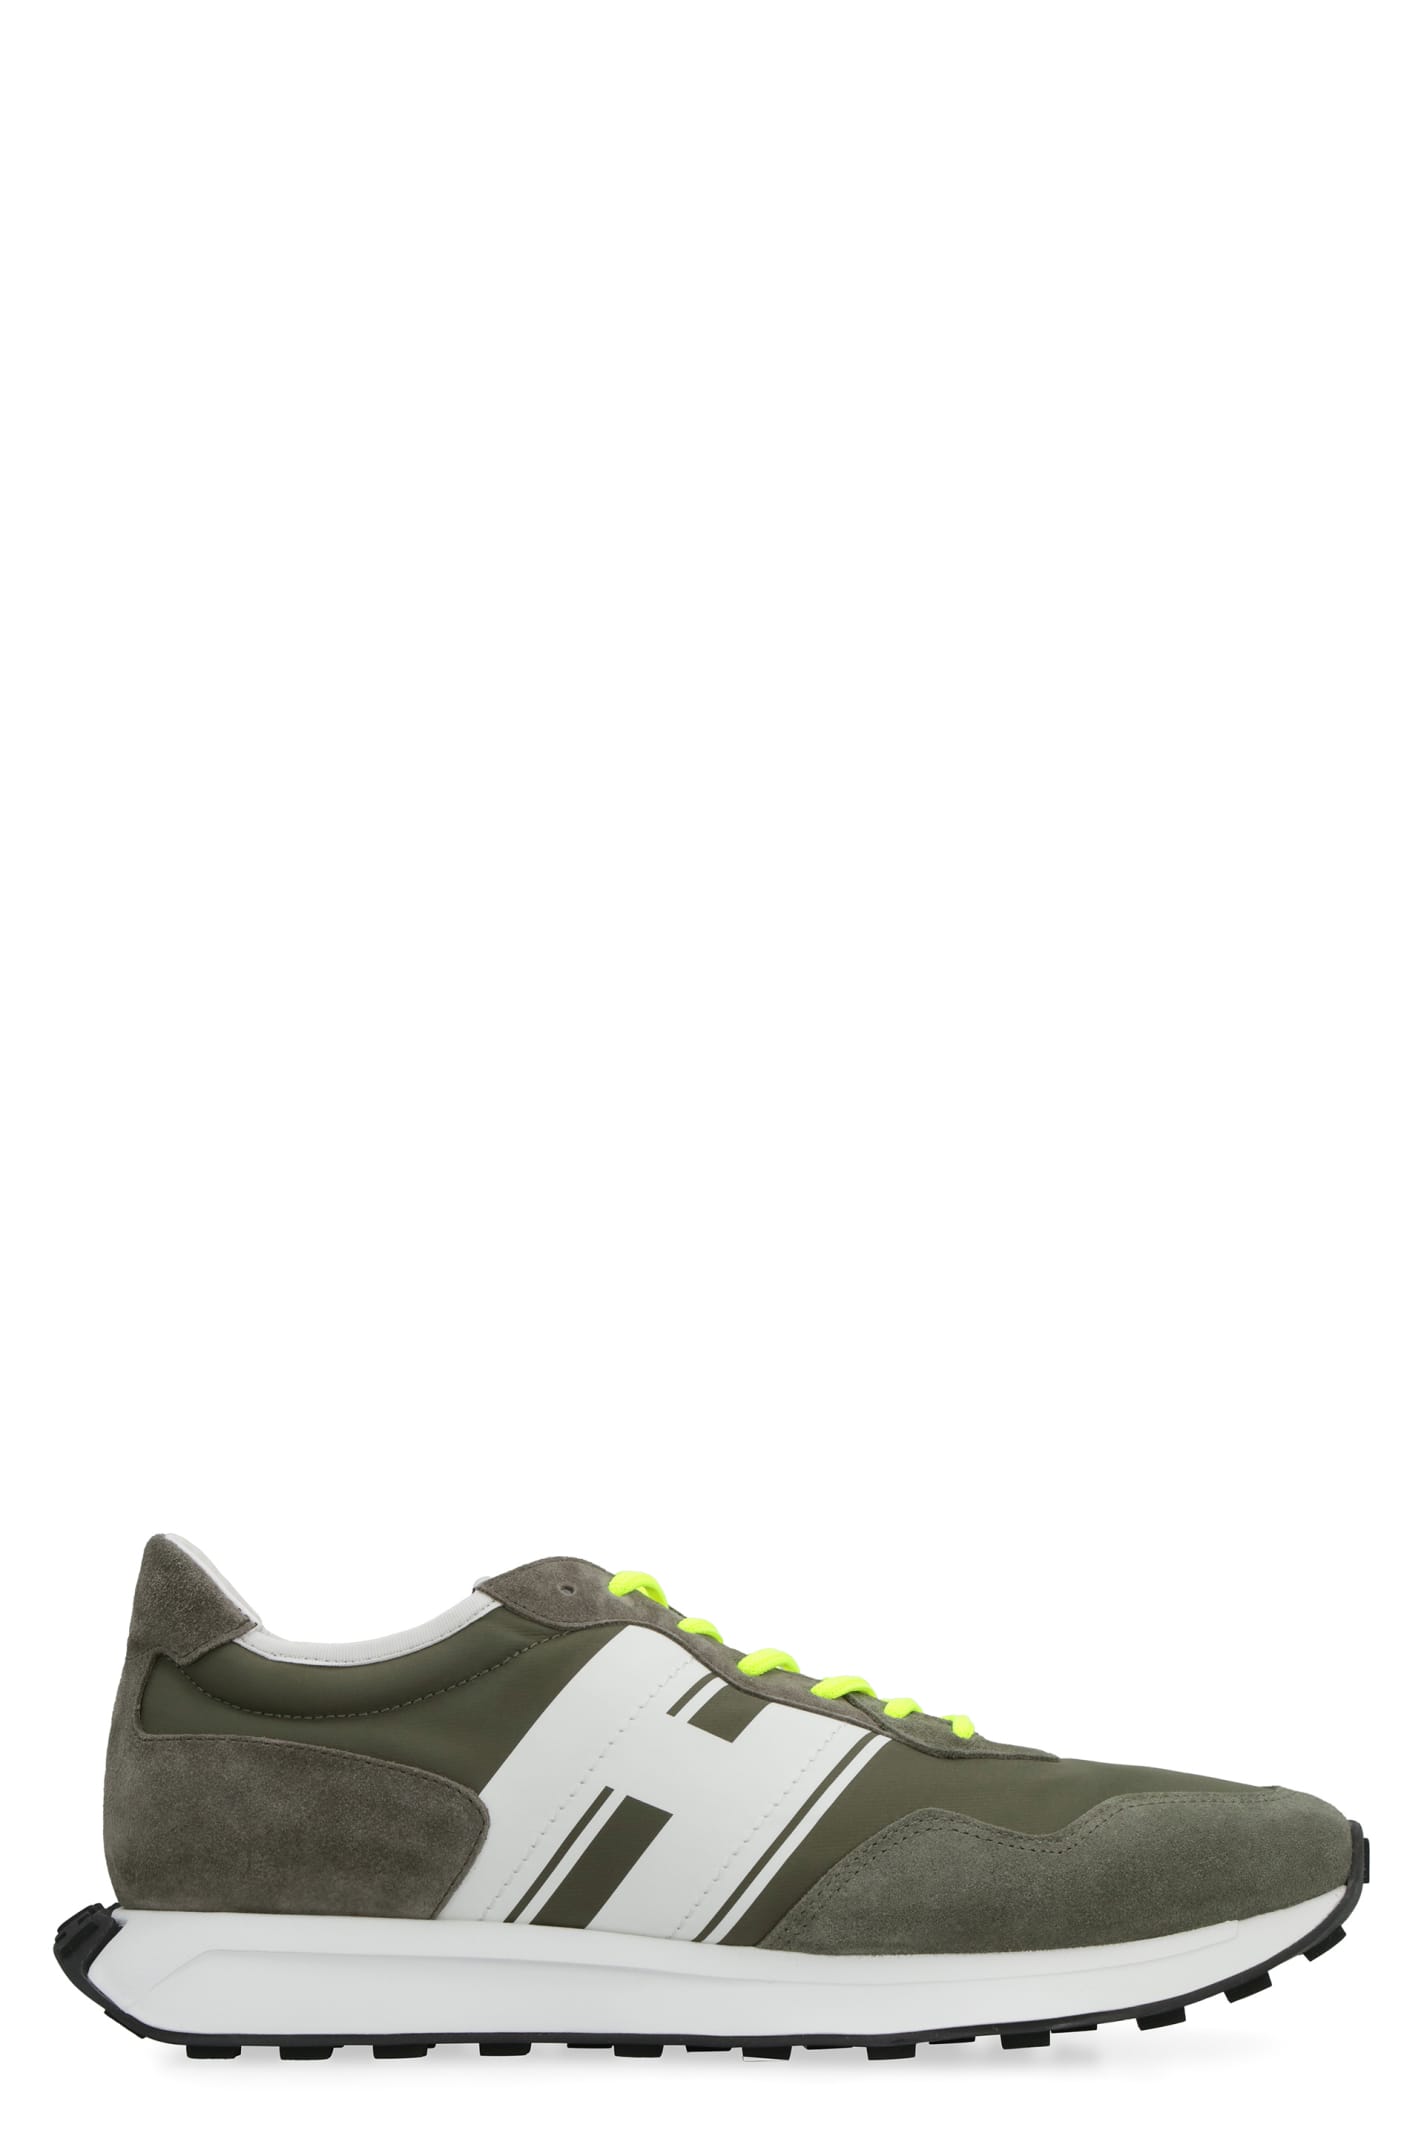 Hogan H601 Leather Sneakers In Green